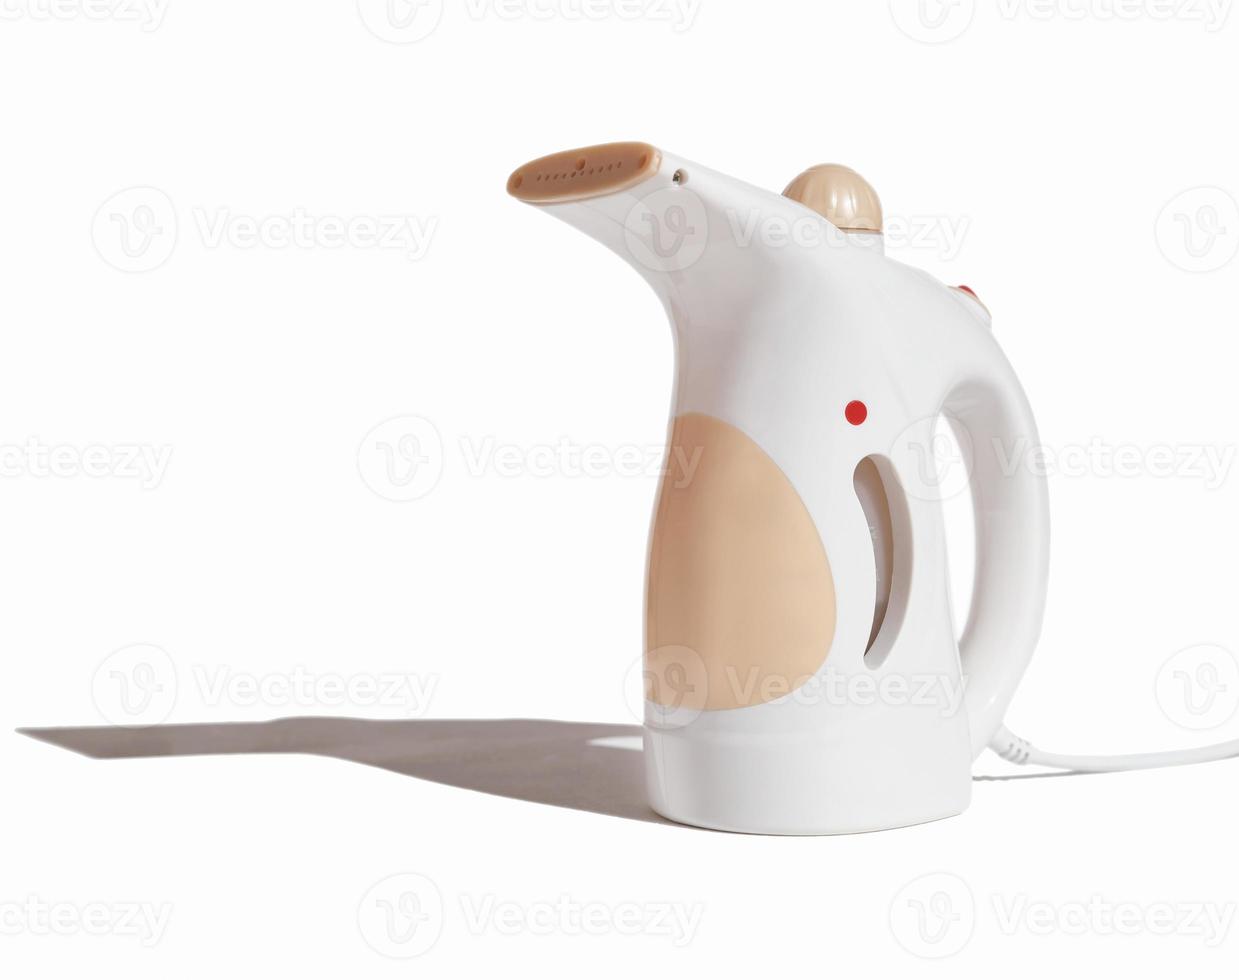 compact electric garment steamer on white background. fabric steamer isolated with shadow. housekeeping routine tools. photo